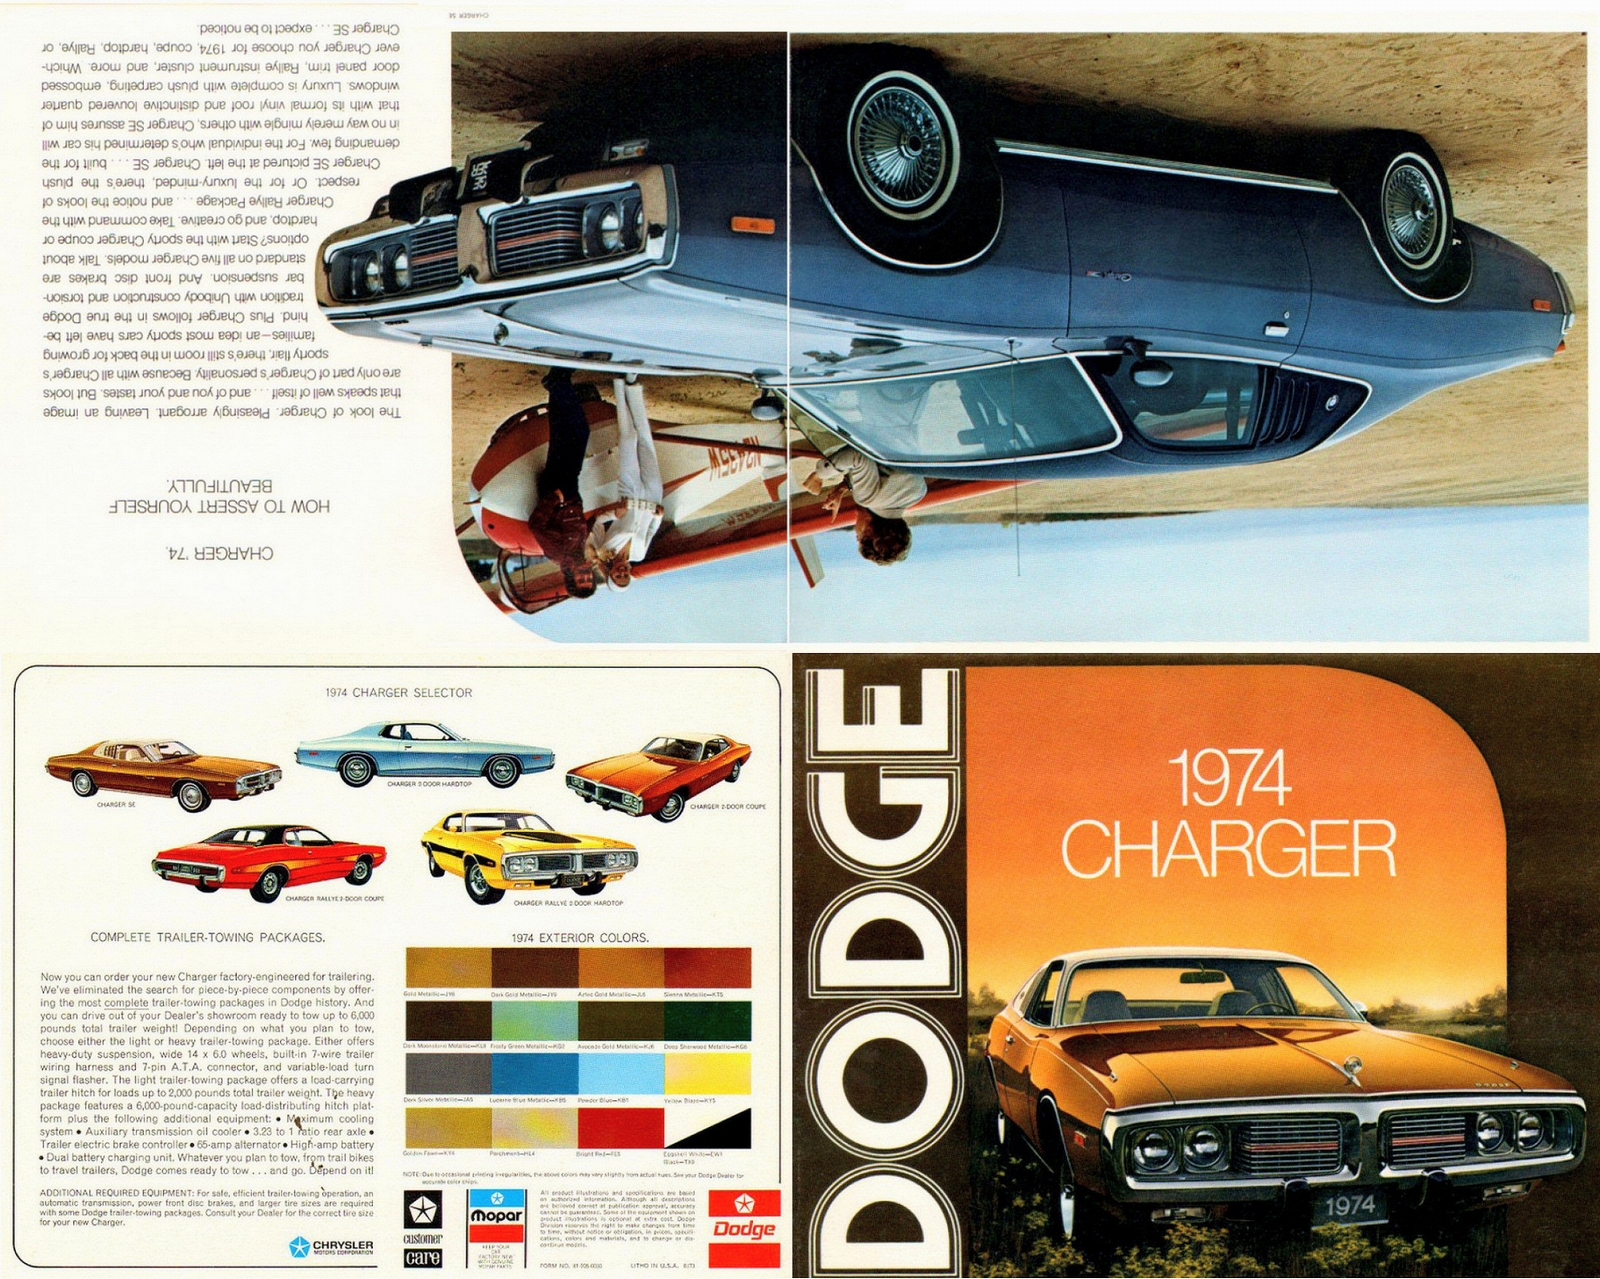 n_1974 Dodge Charger Foldout-Side A1.jpg